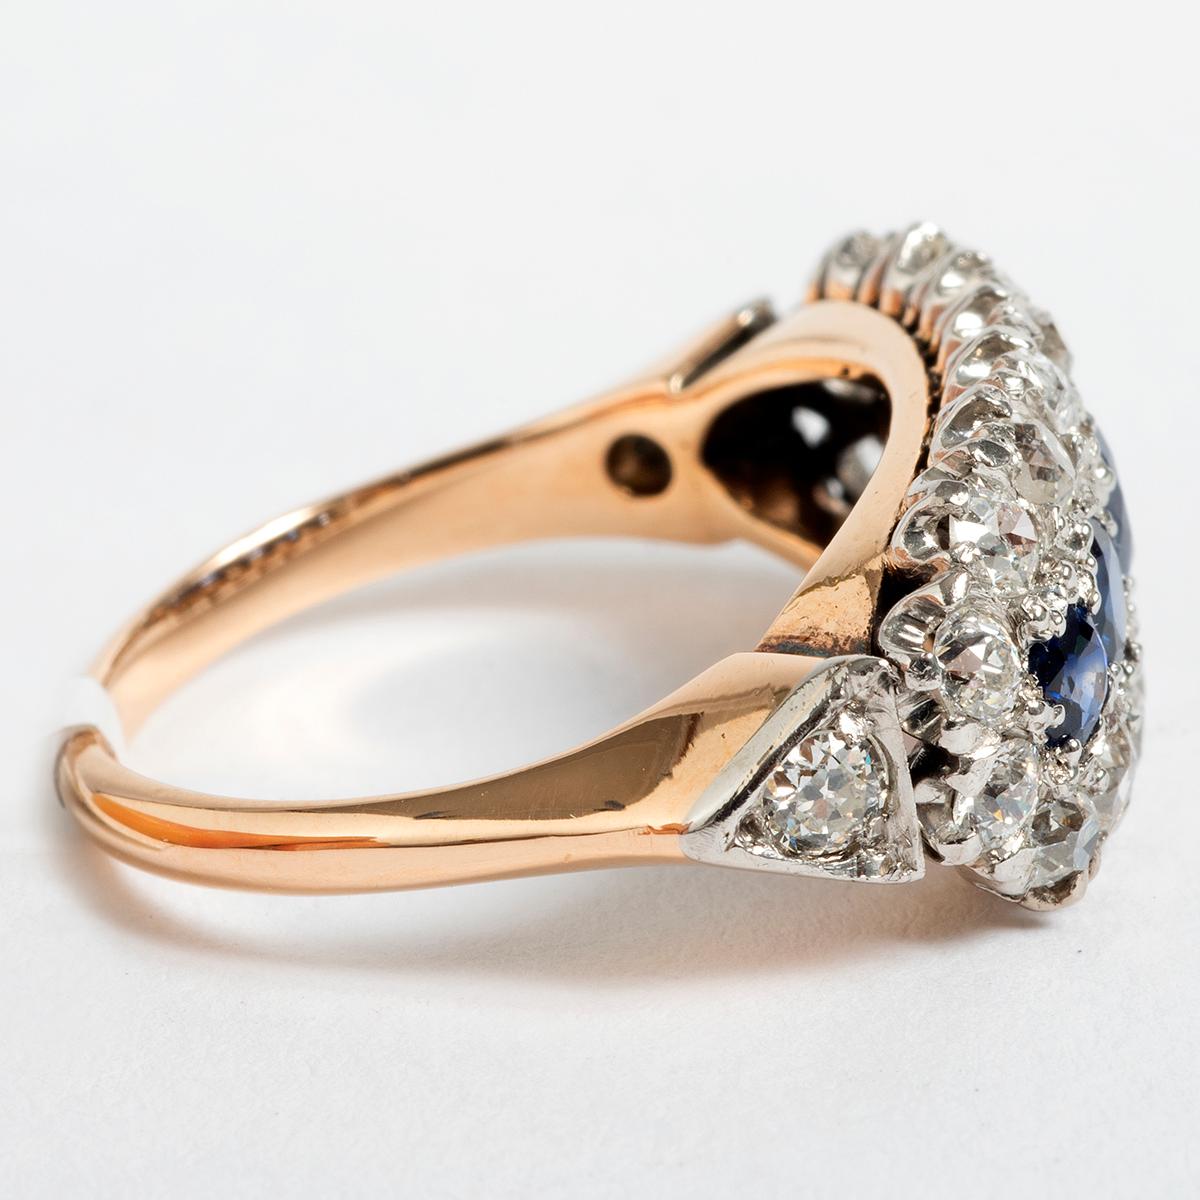 Set in 18K Yellow gold, this vibrant platinum diamond and sapphire cluster ring ring is dated circa 1890's. An elegant piece and an ideal gift for her .... This ring comes in UK size O / US size 7.25. 